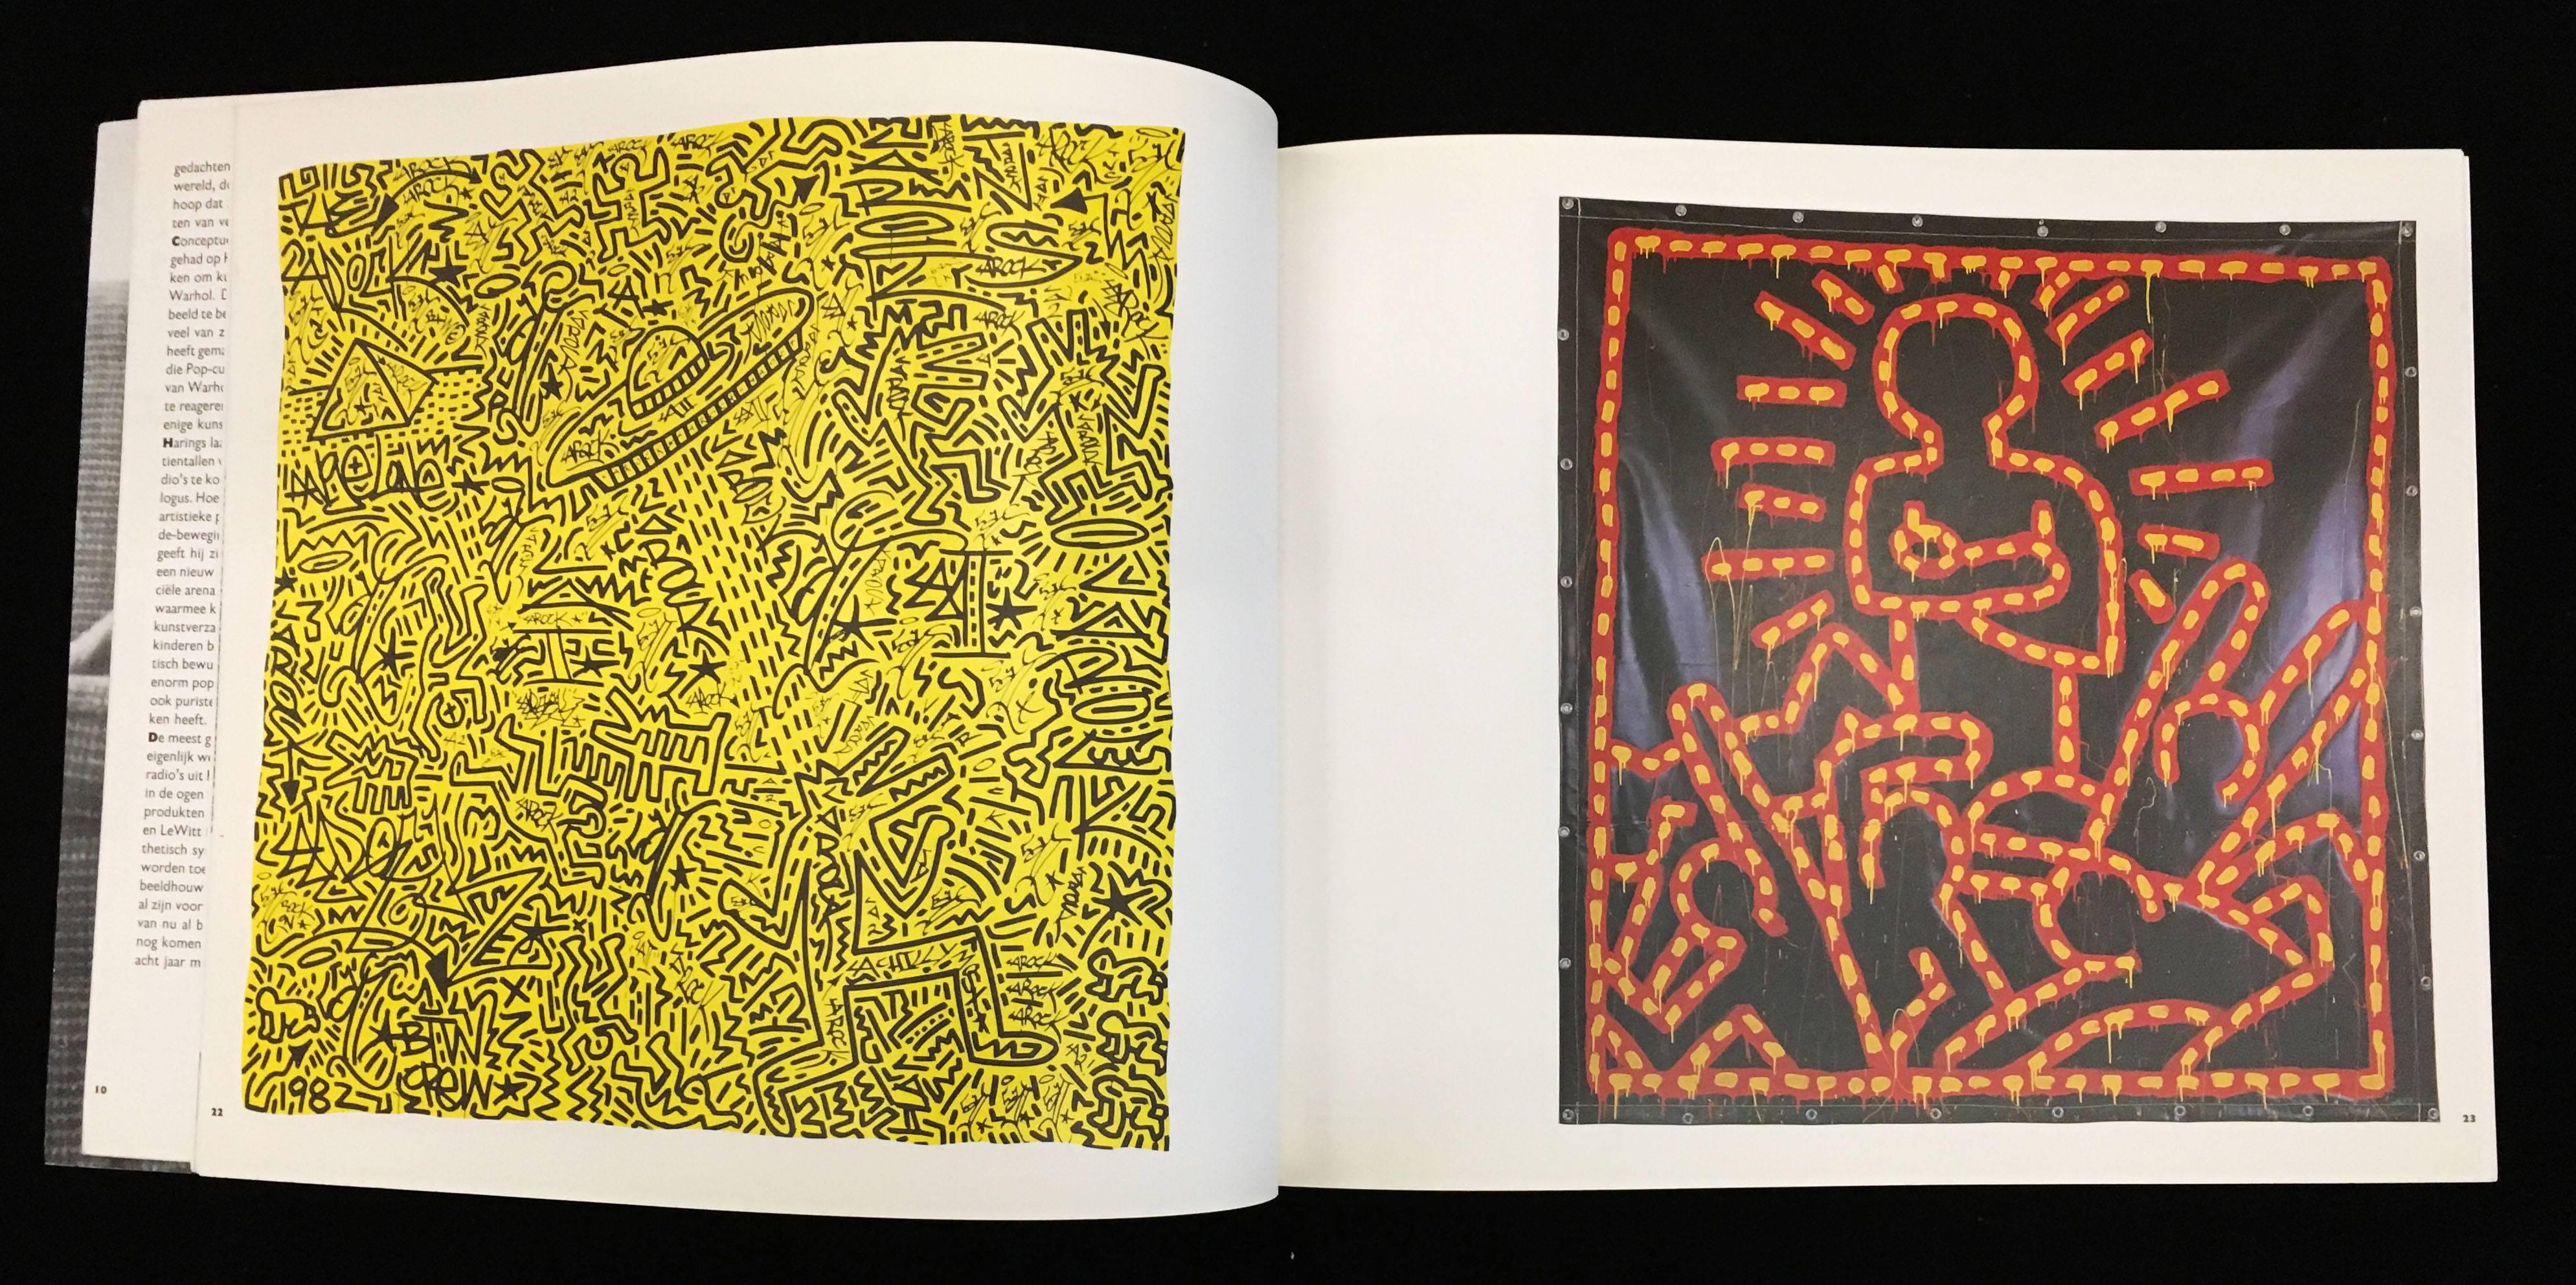 Keith Haring Stedelijk Museum catalog Amsterdam (vintage Keith Haring)  - Pop Art Art by (after) Keith Haring